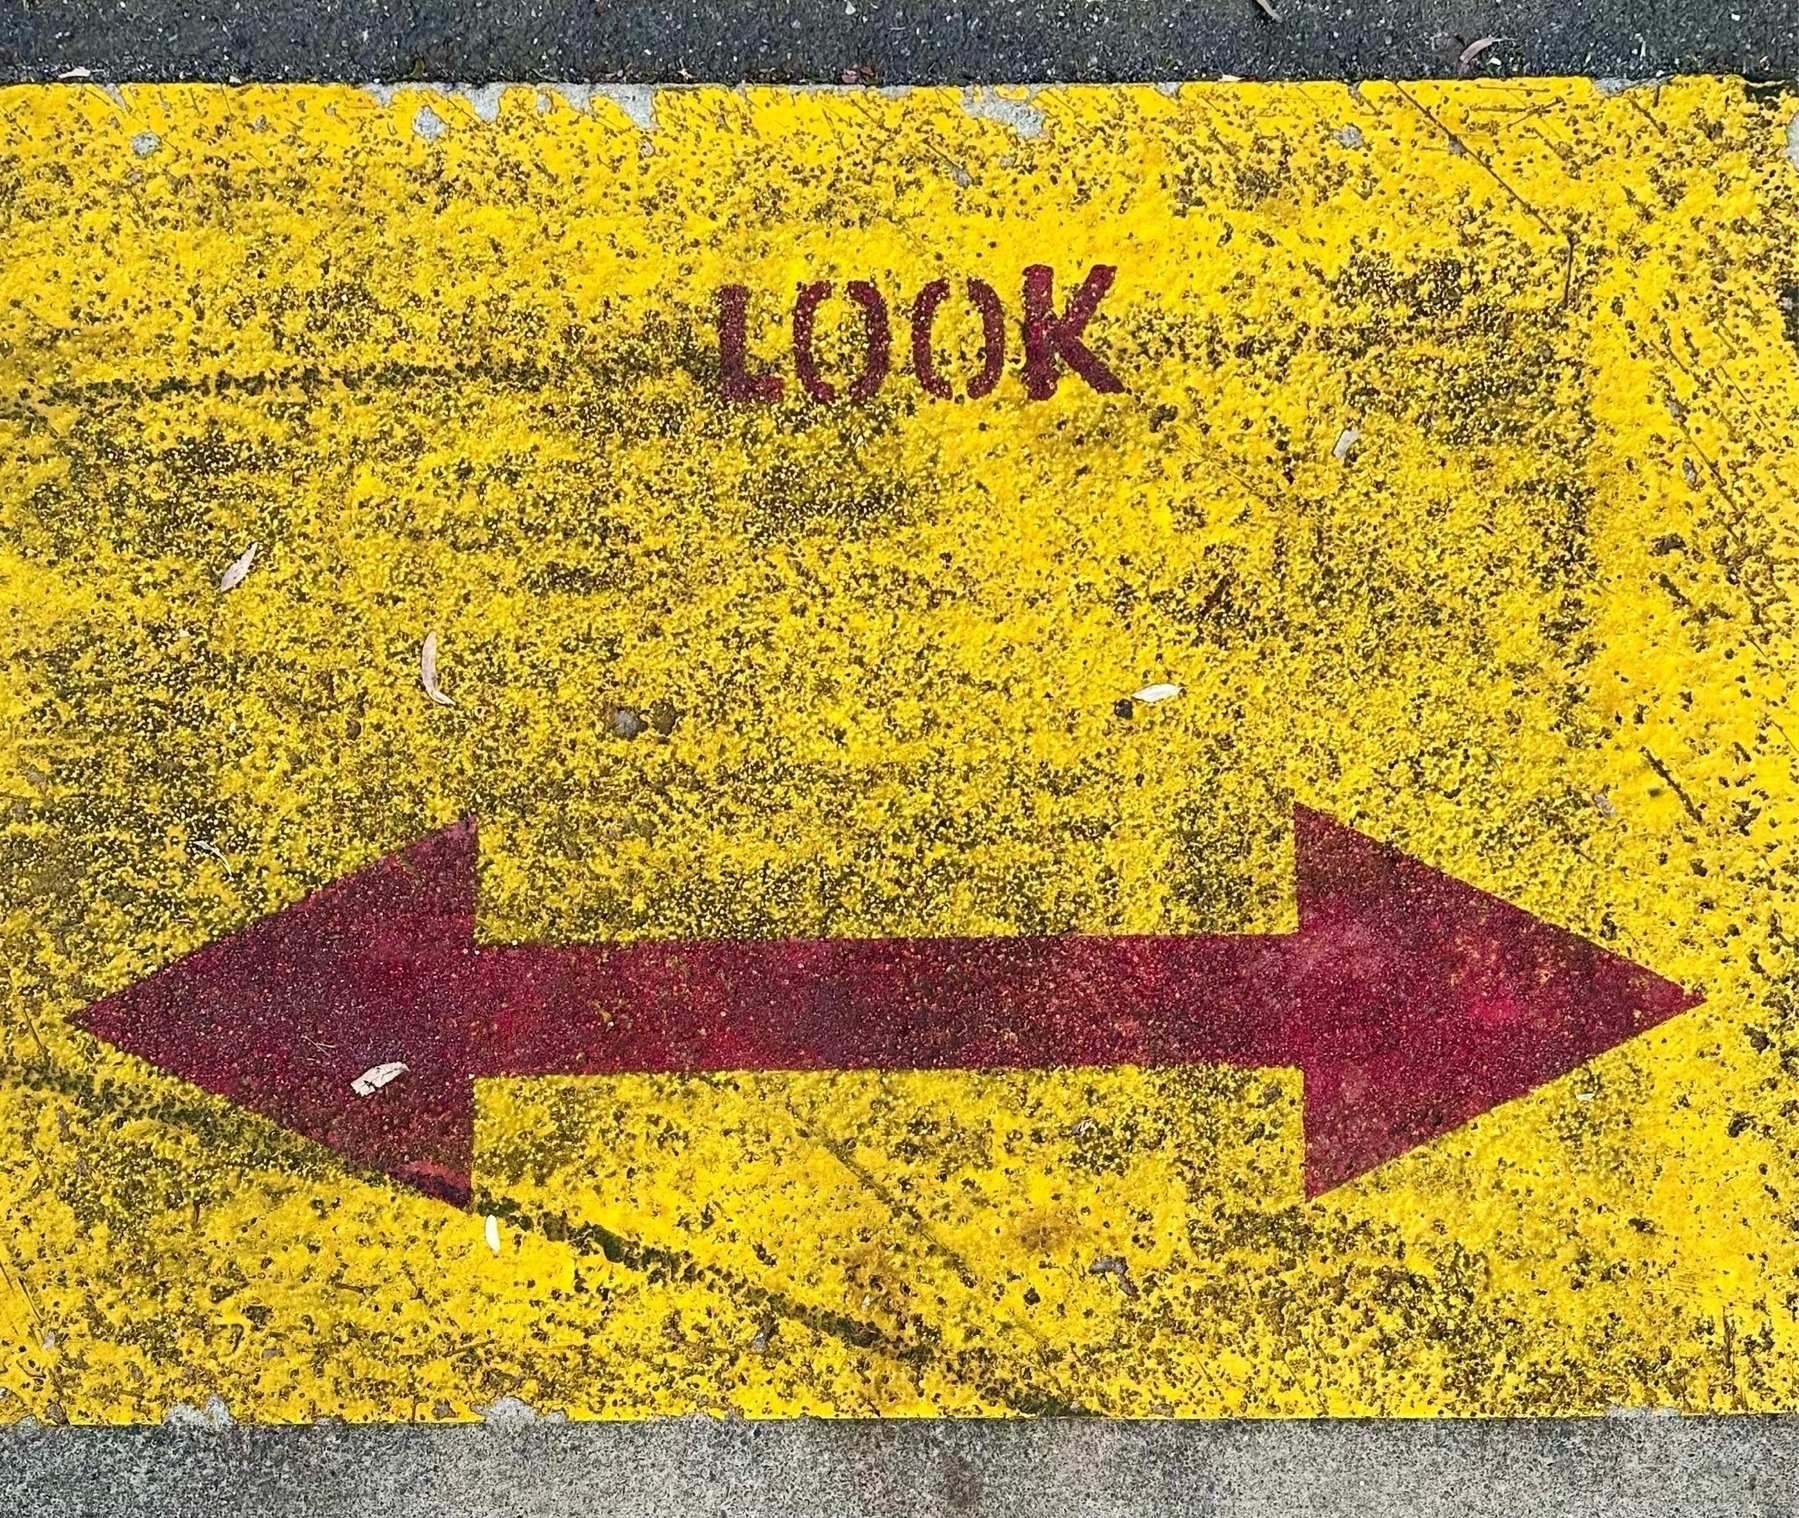 A yellow rectangle painted on a path. “Look” in red at the top and a red arrow pointing both ways at the bottom.